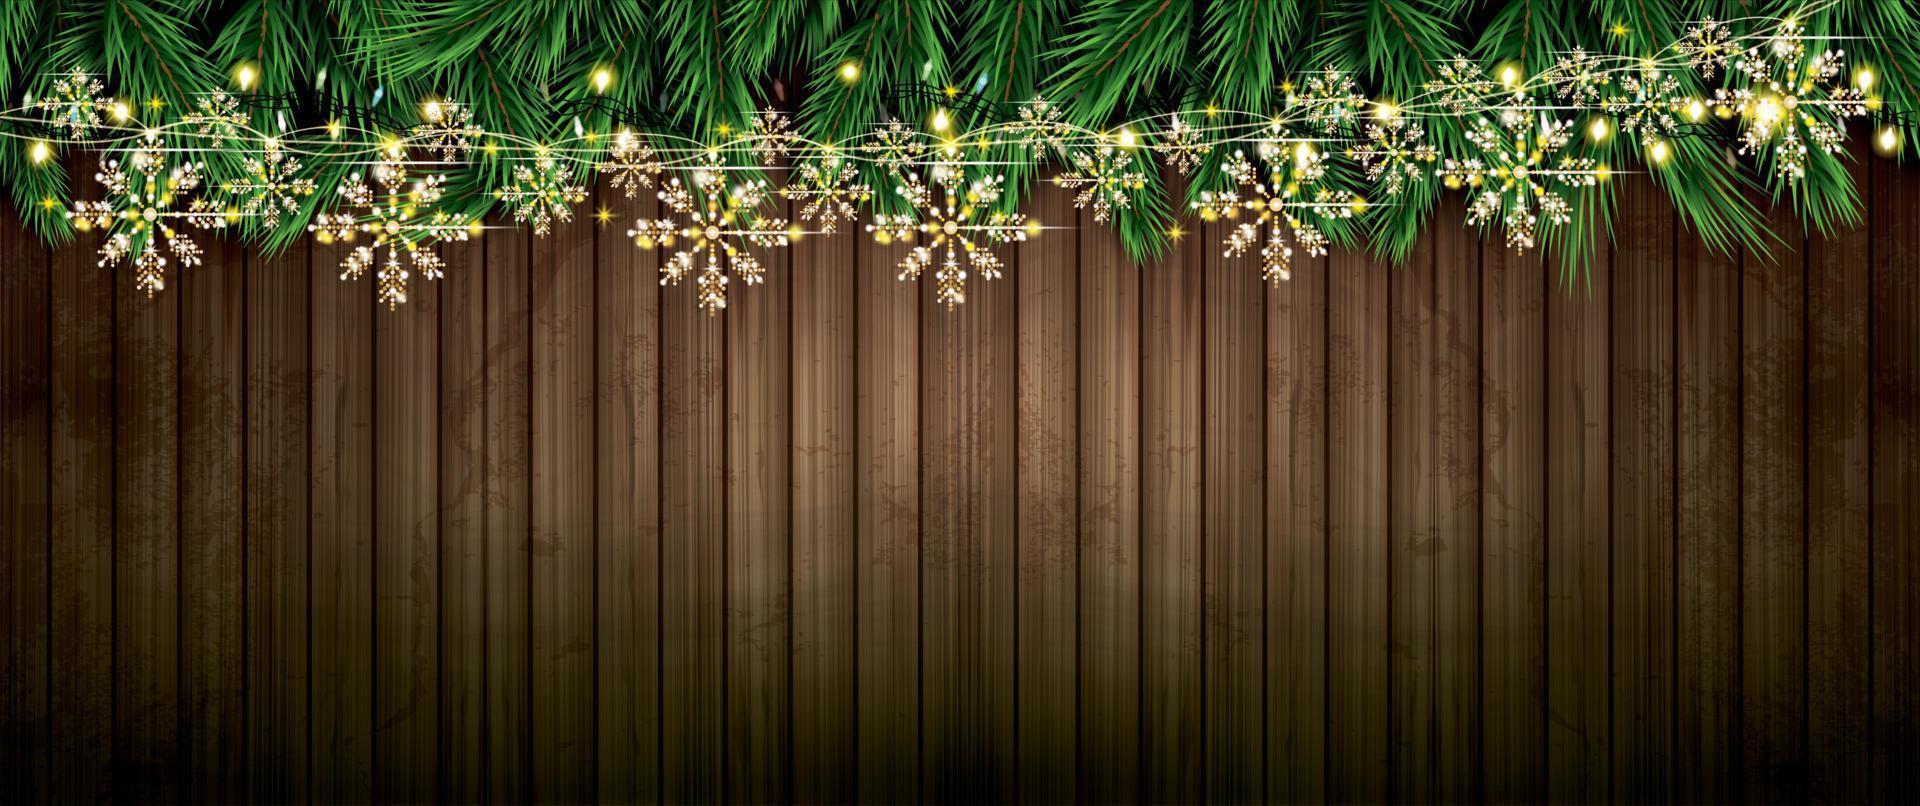 Fir Branch with Neon Lights and Golden Garland with Snowflakes on Wooden Background. vector